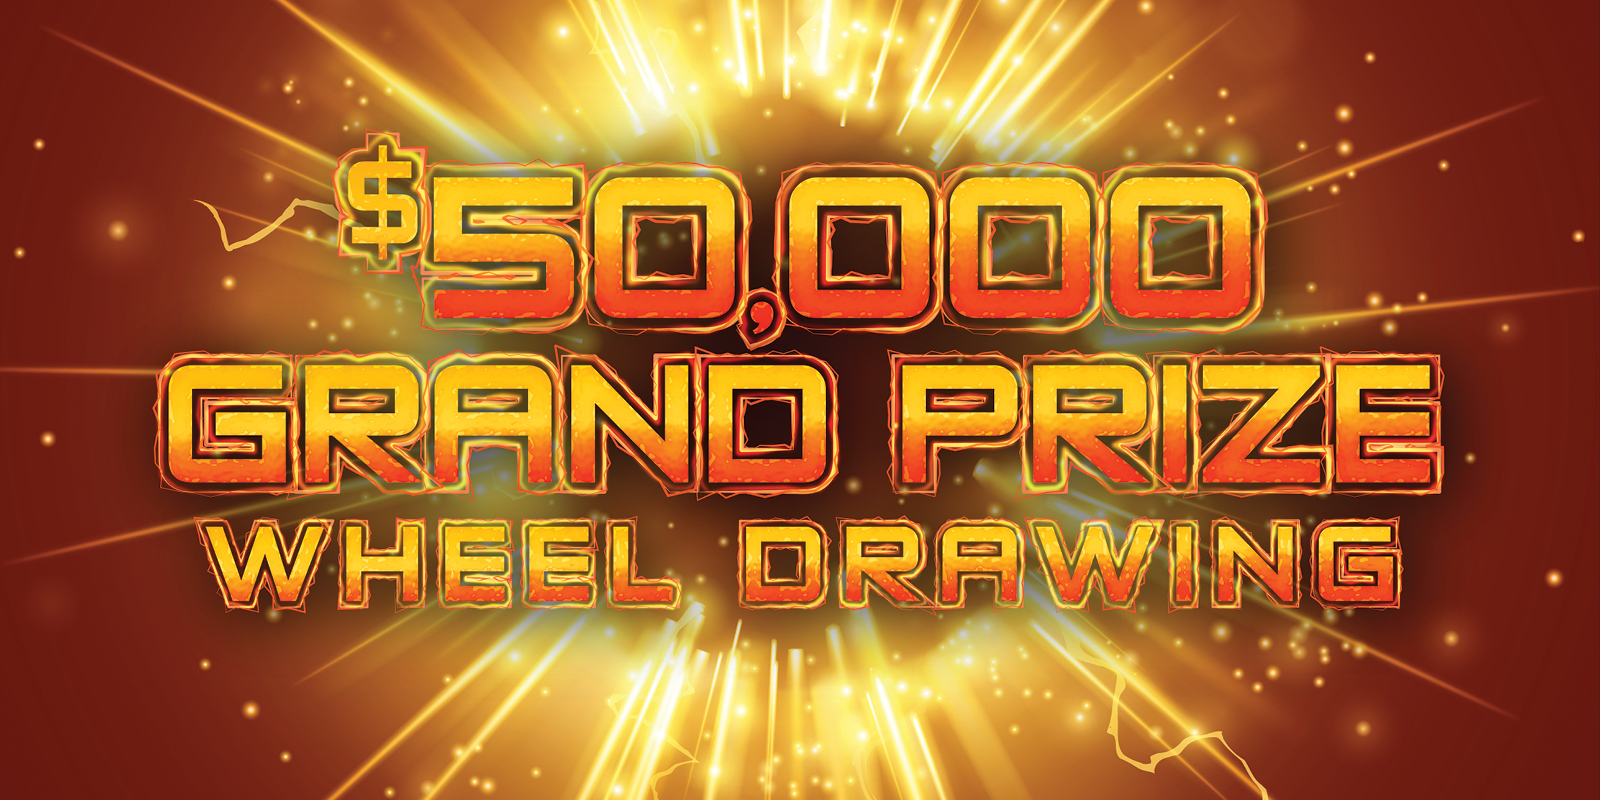 $50,000 Wheel Drawing creative showing the event title with a red and orange electric esthetic